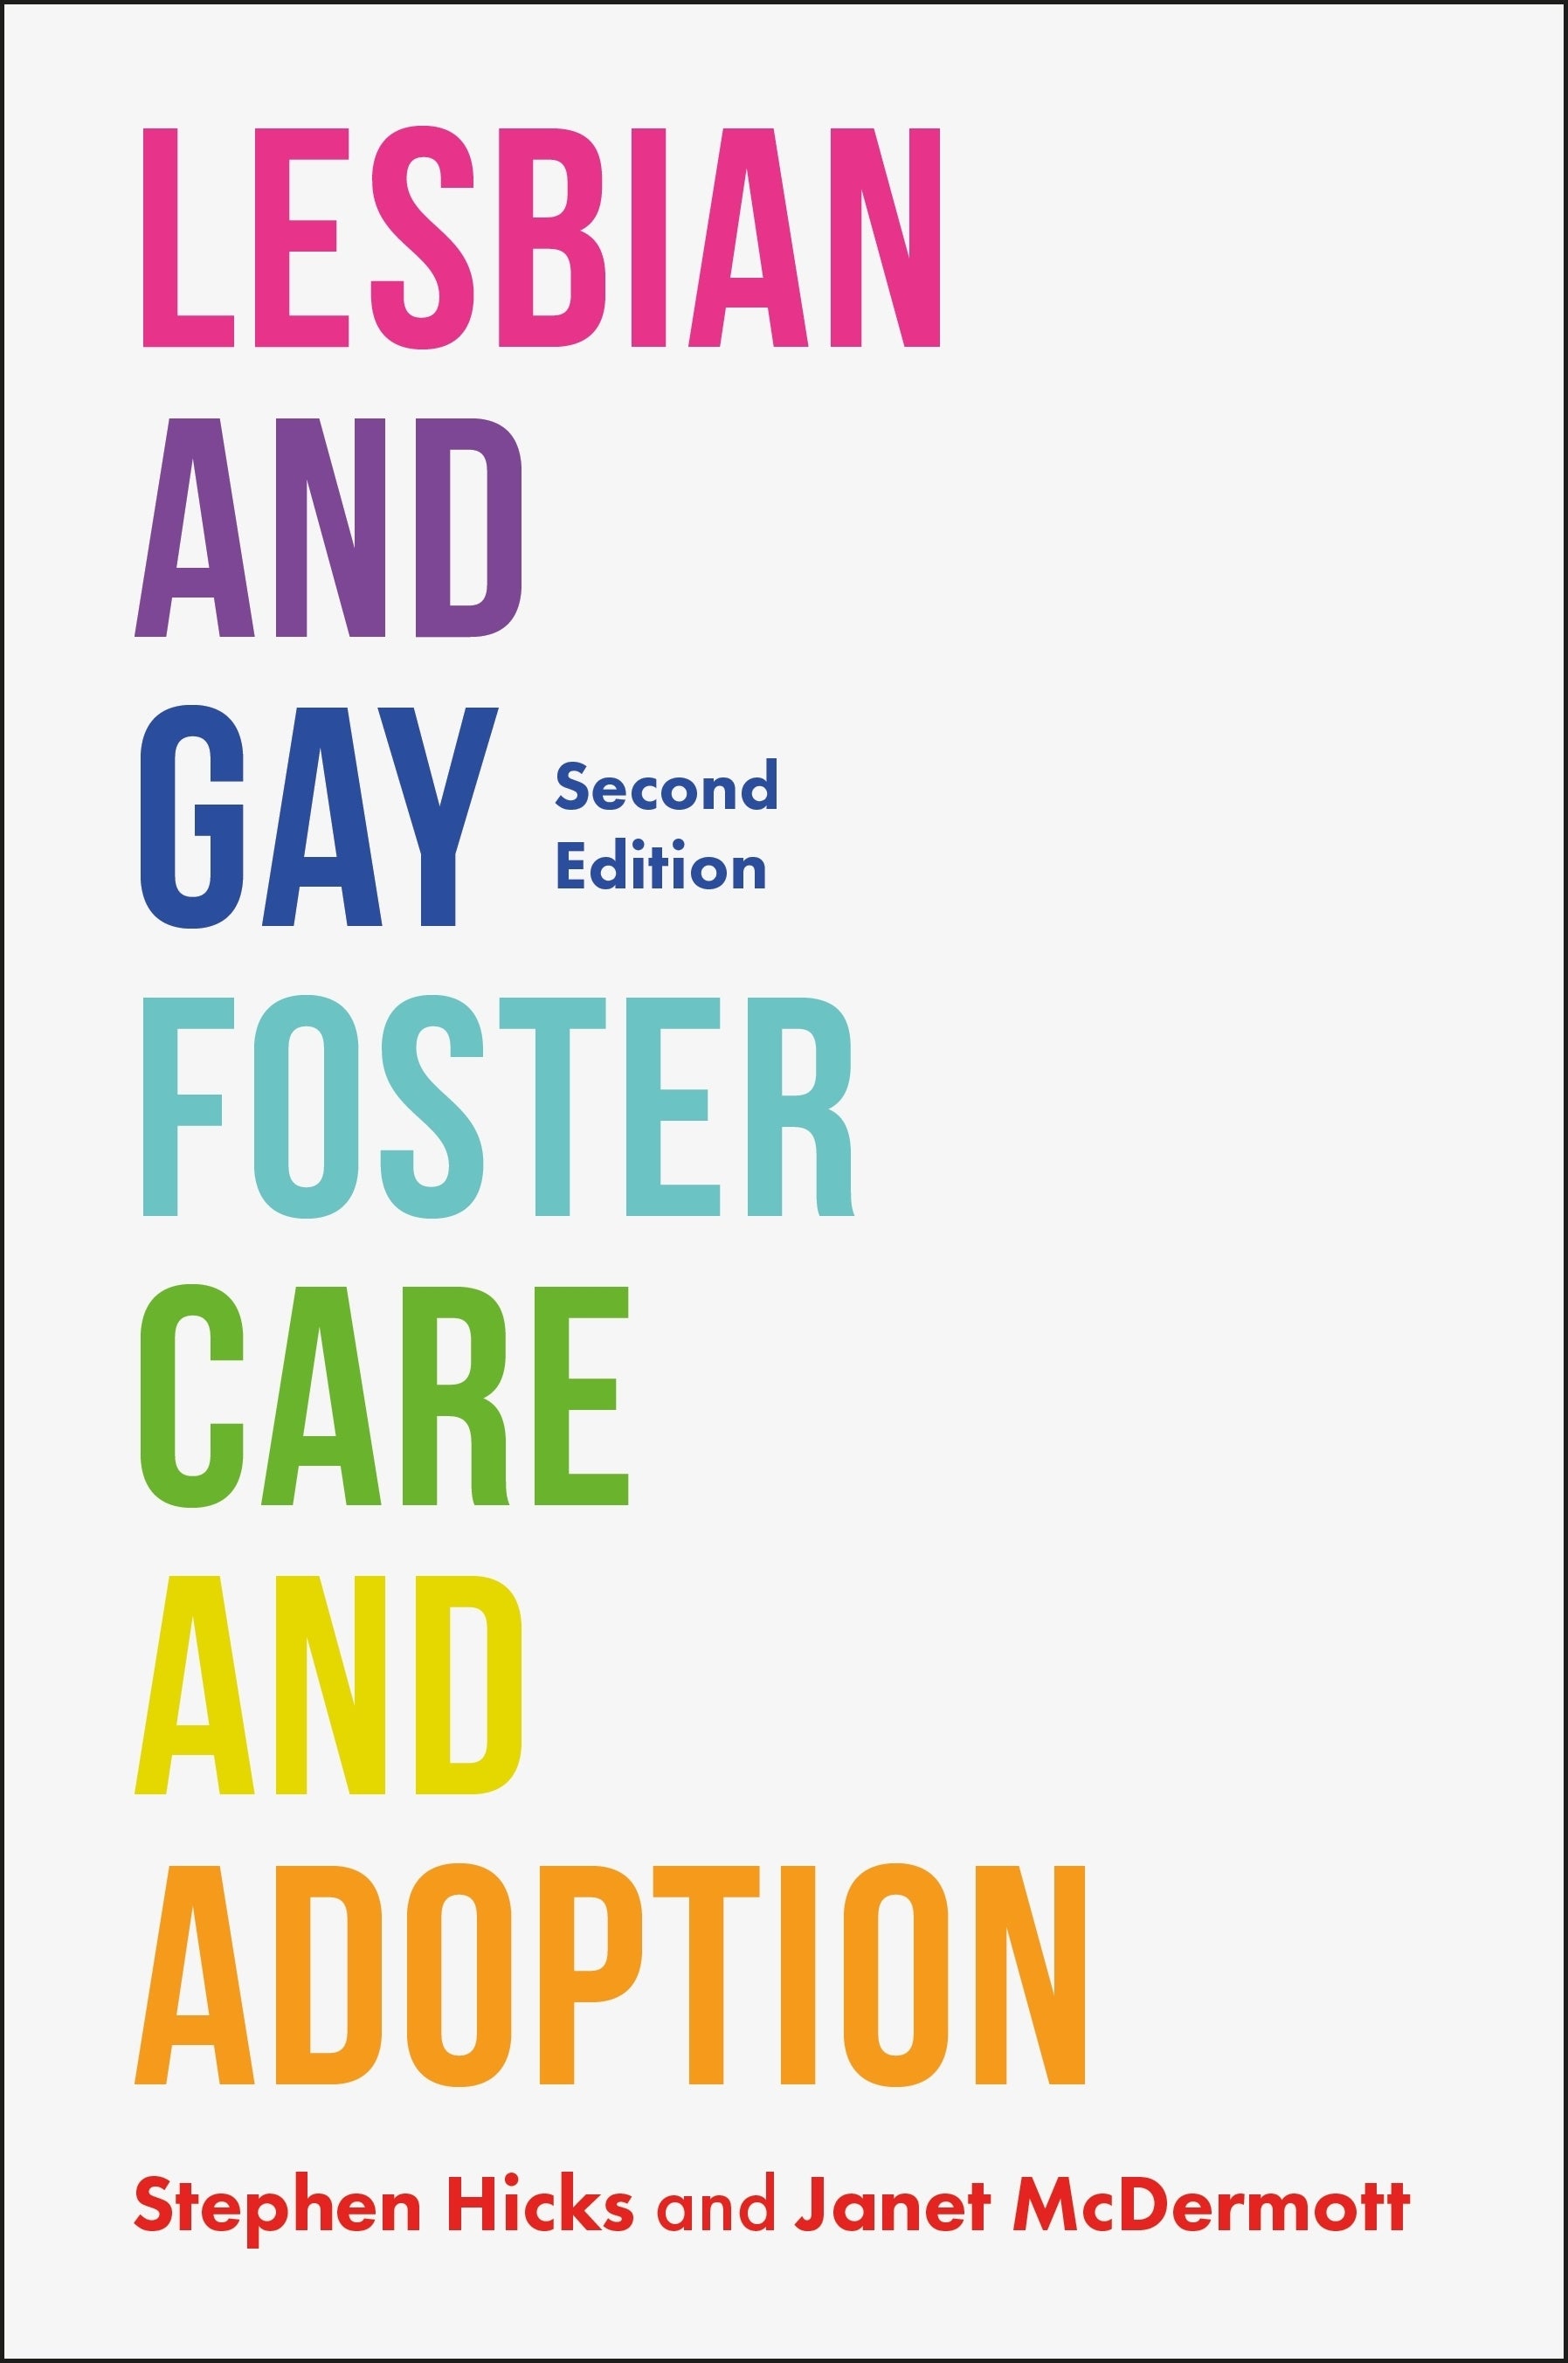 Lesbian and Gay Foster Care and Adoption, Second Edition by Janet McDermott, Stephen Hicks